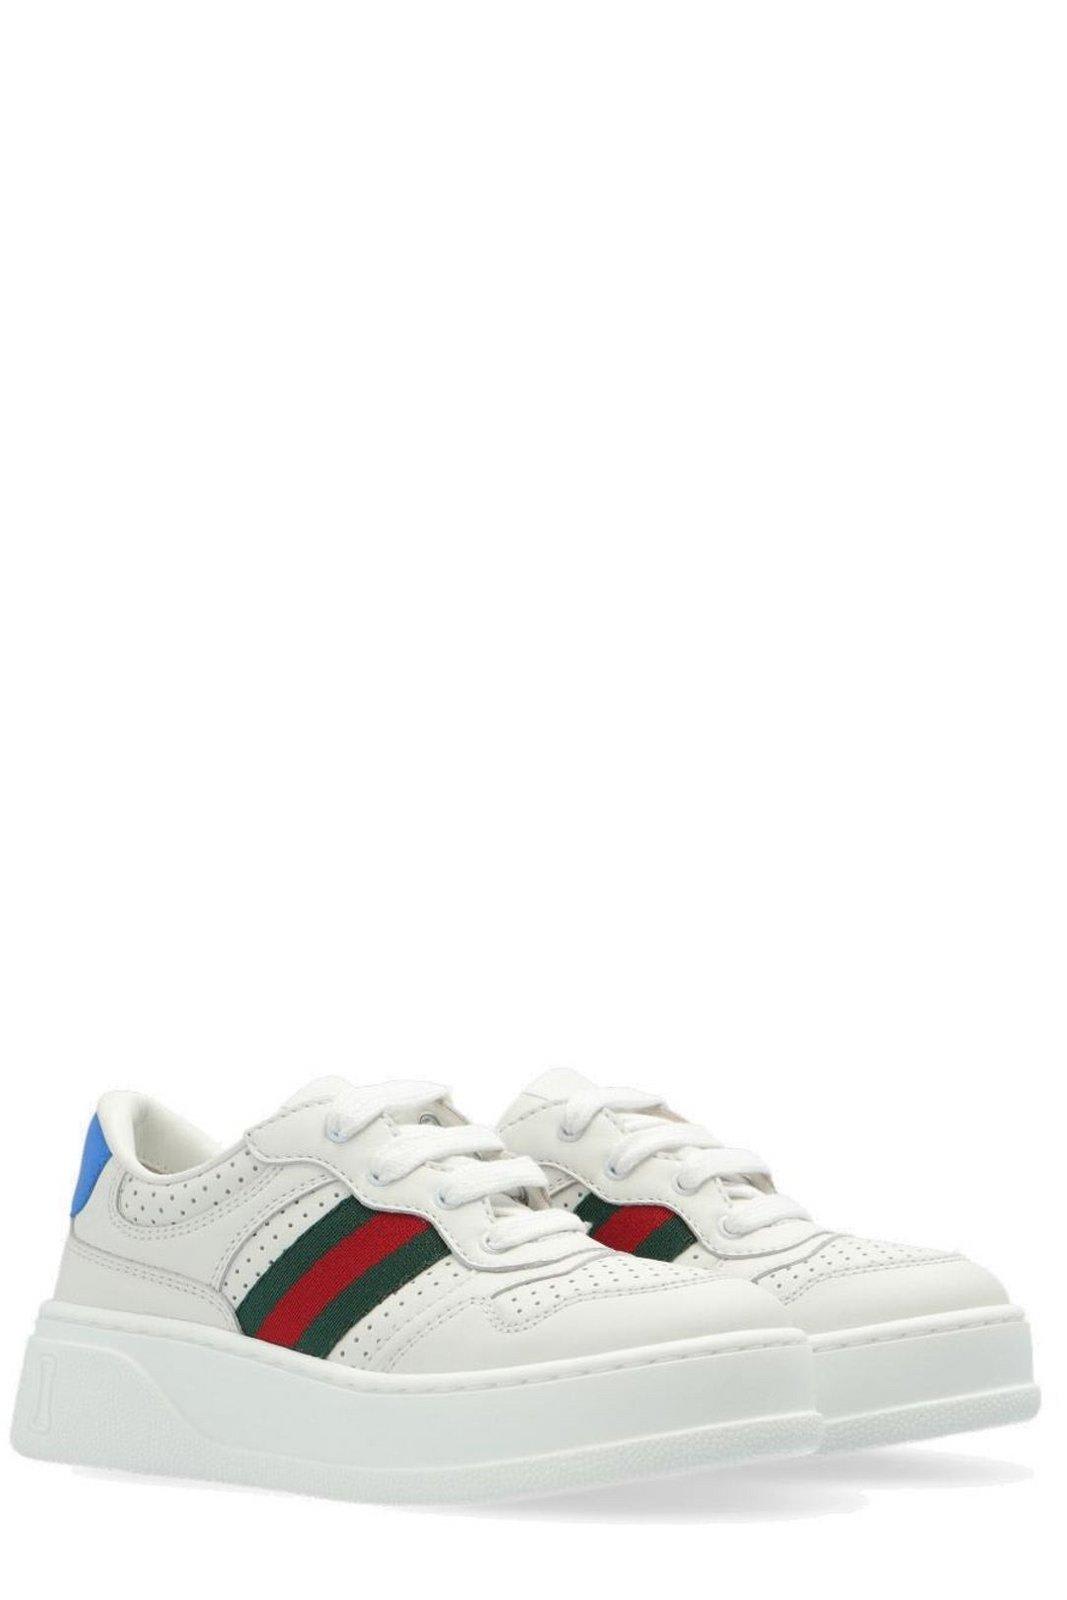 Shop Gucci Round Toe Chunky Sneakers In Bianco